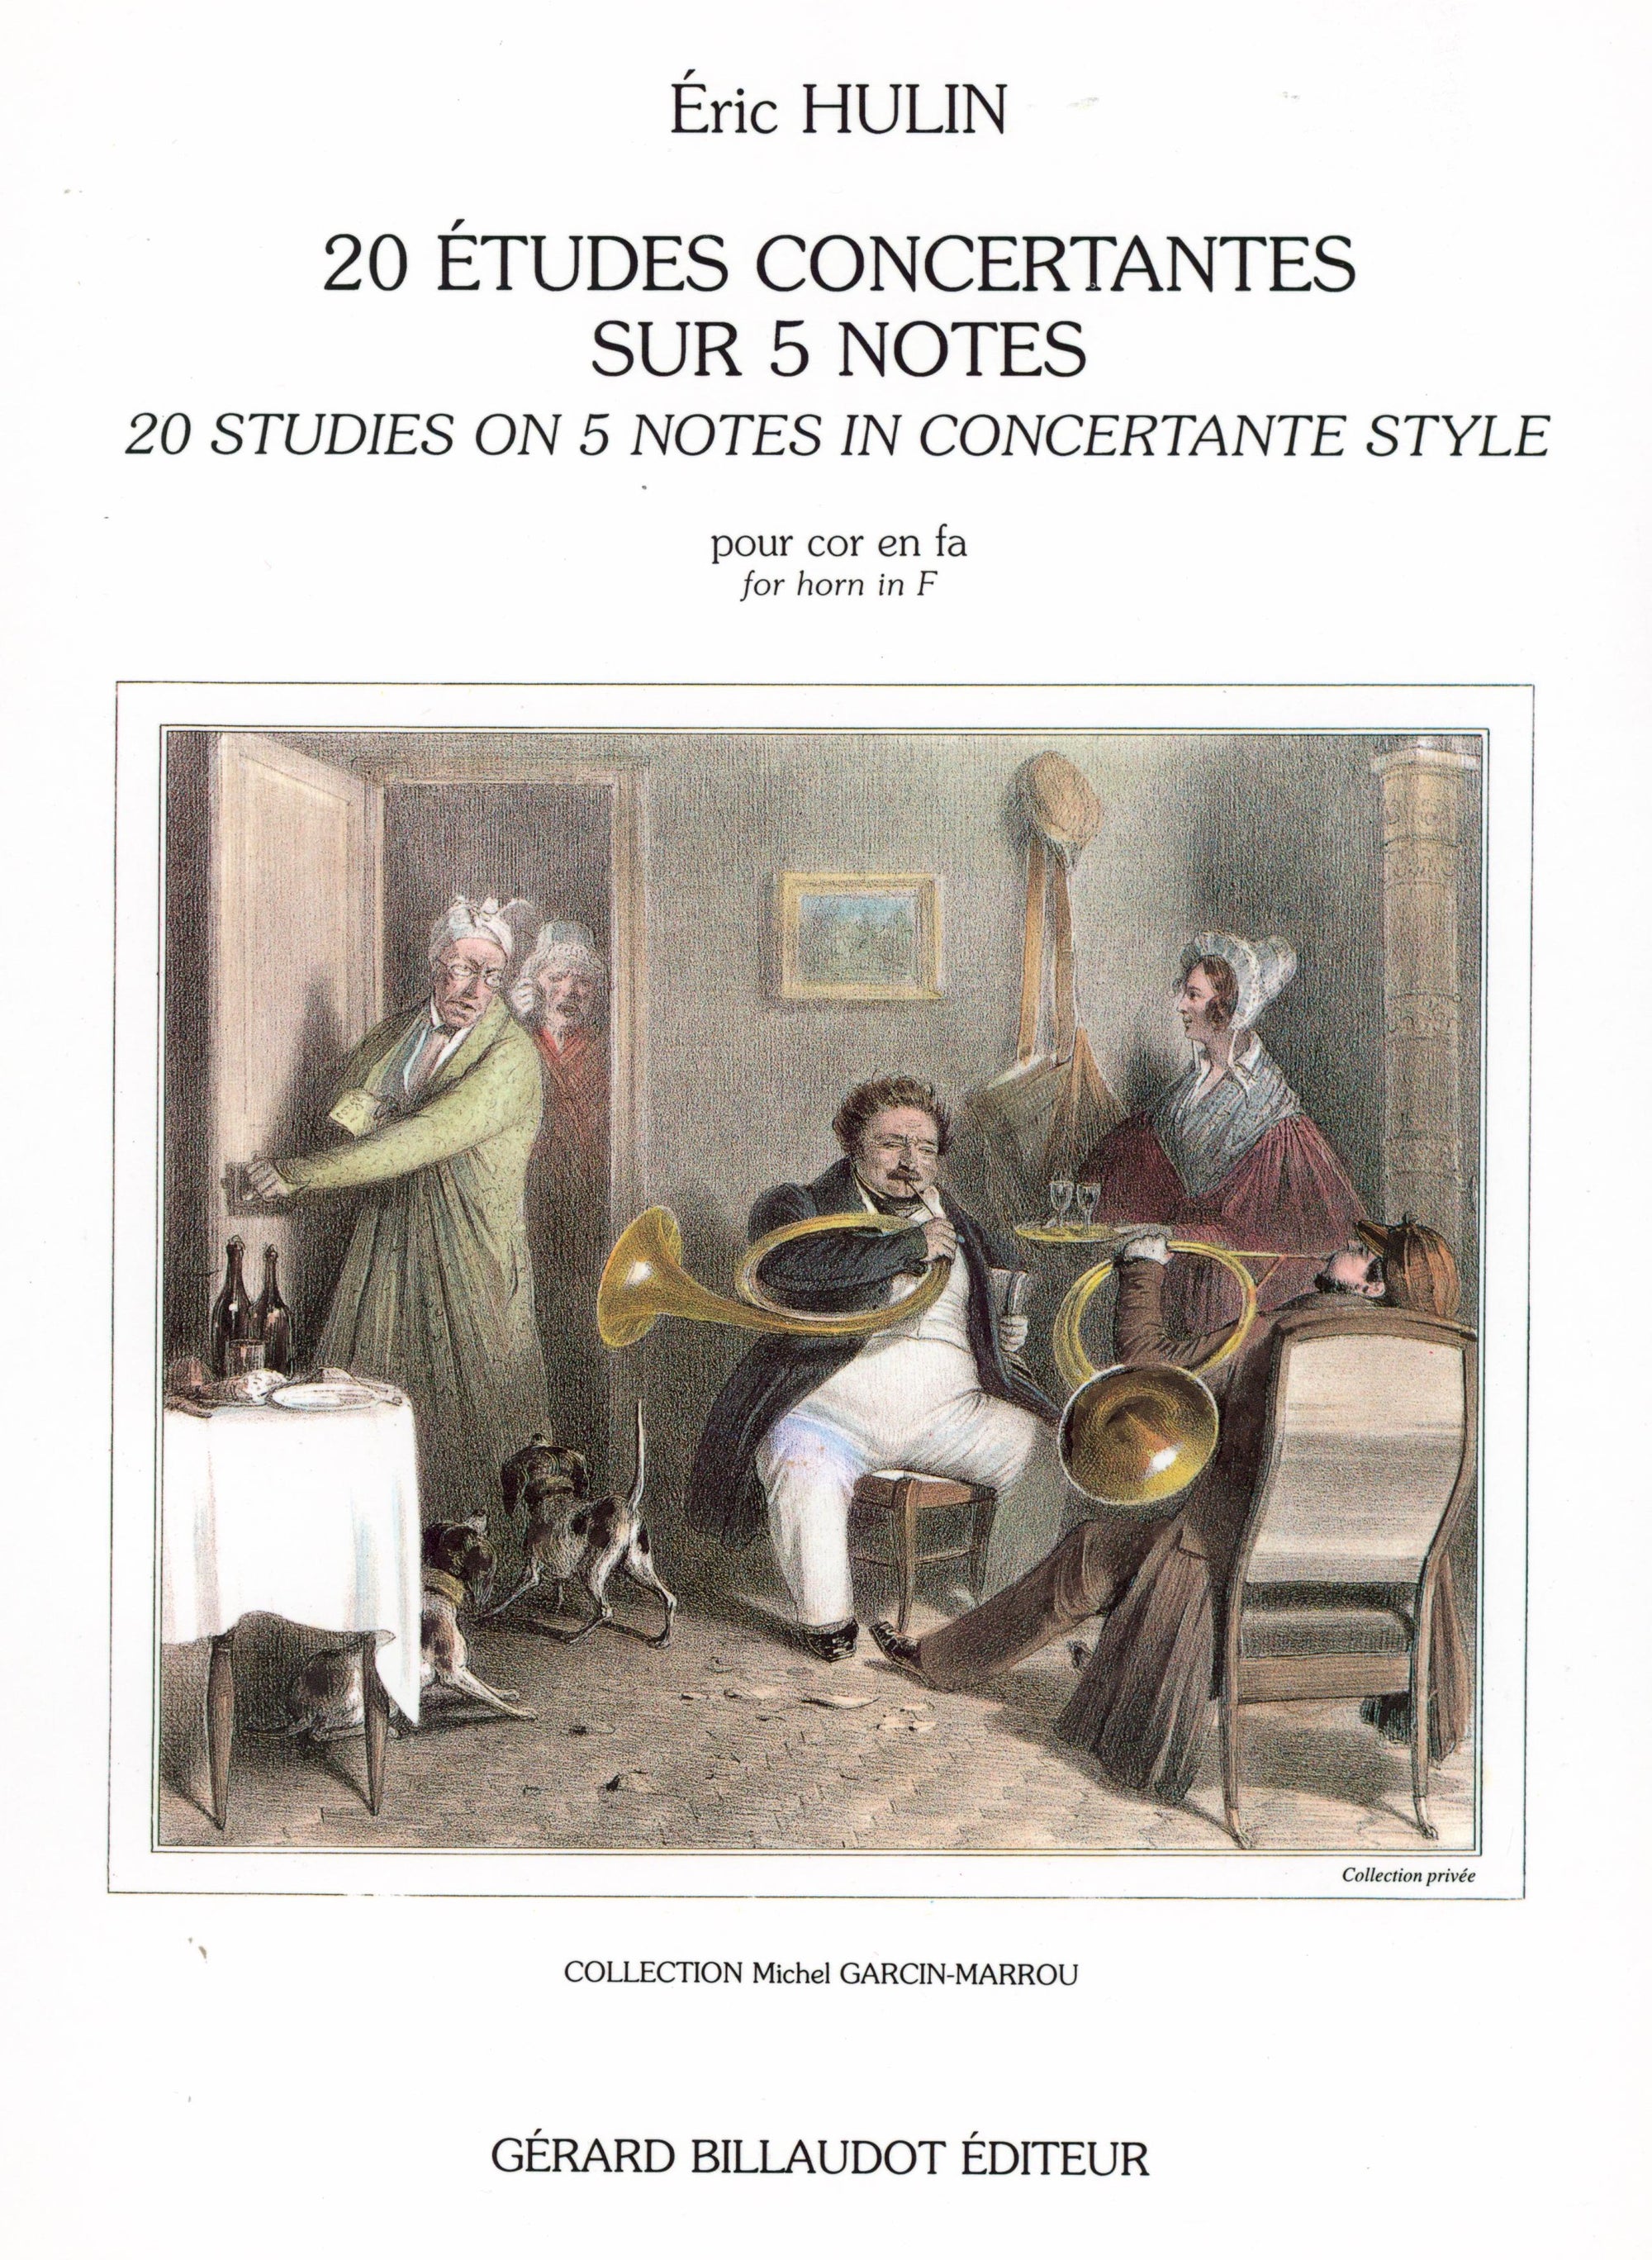 Hulin: 20 Studies on 5 Notes in Concertante Style